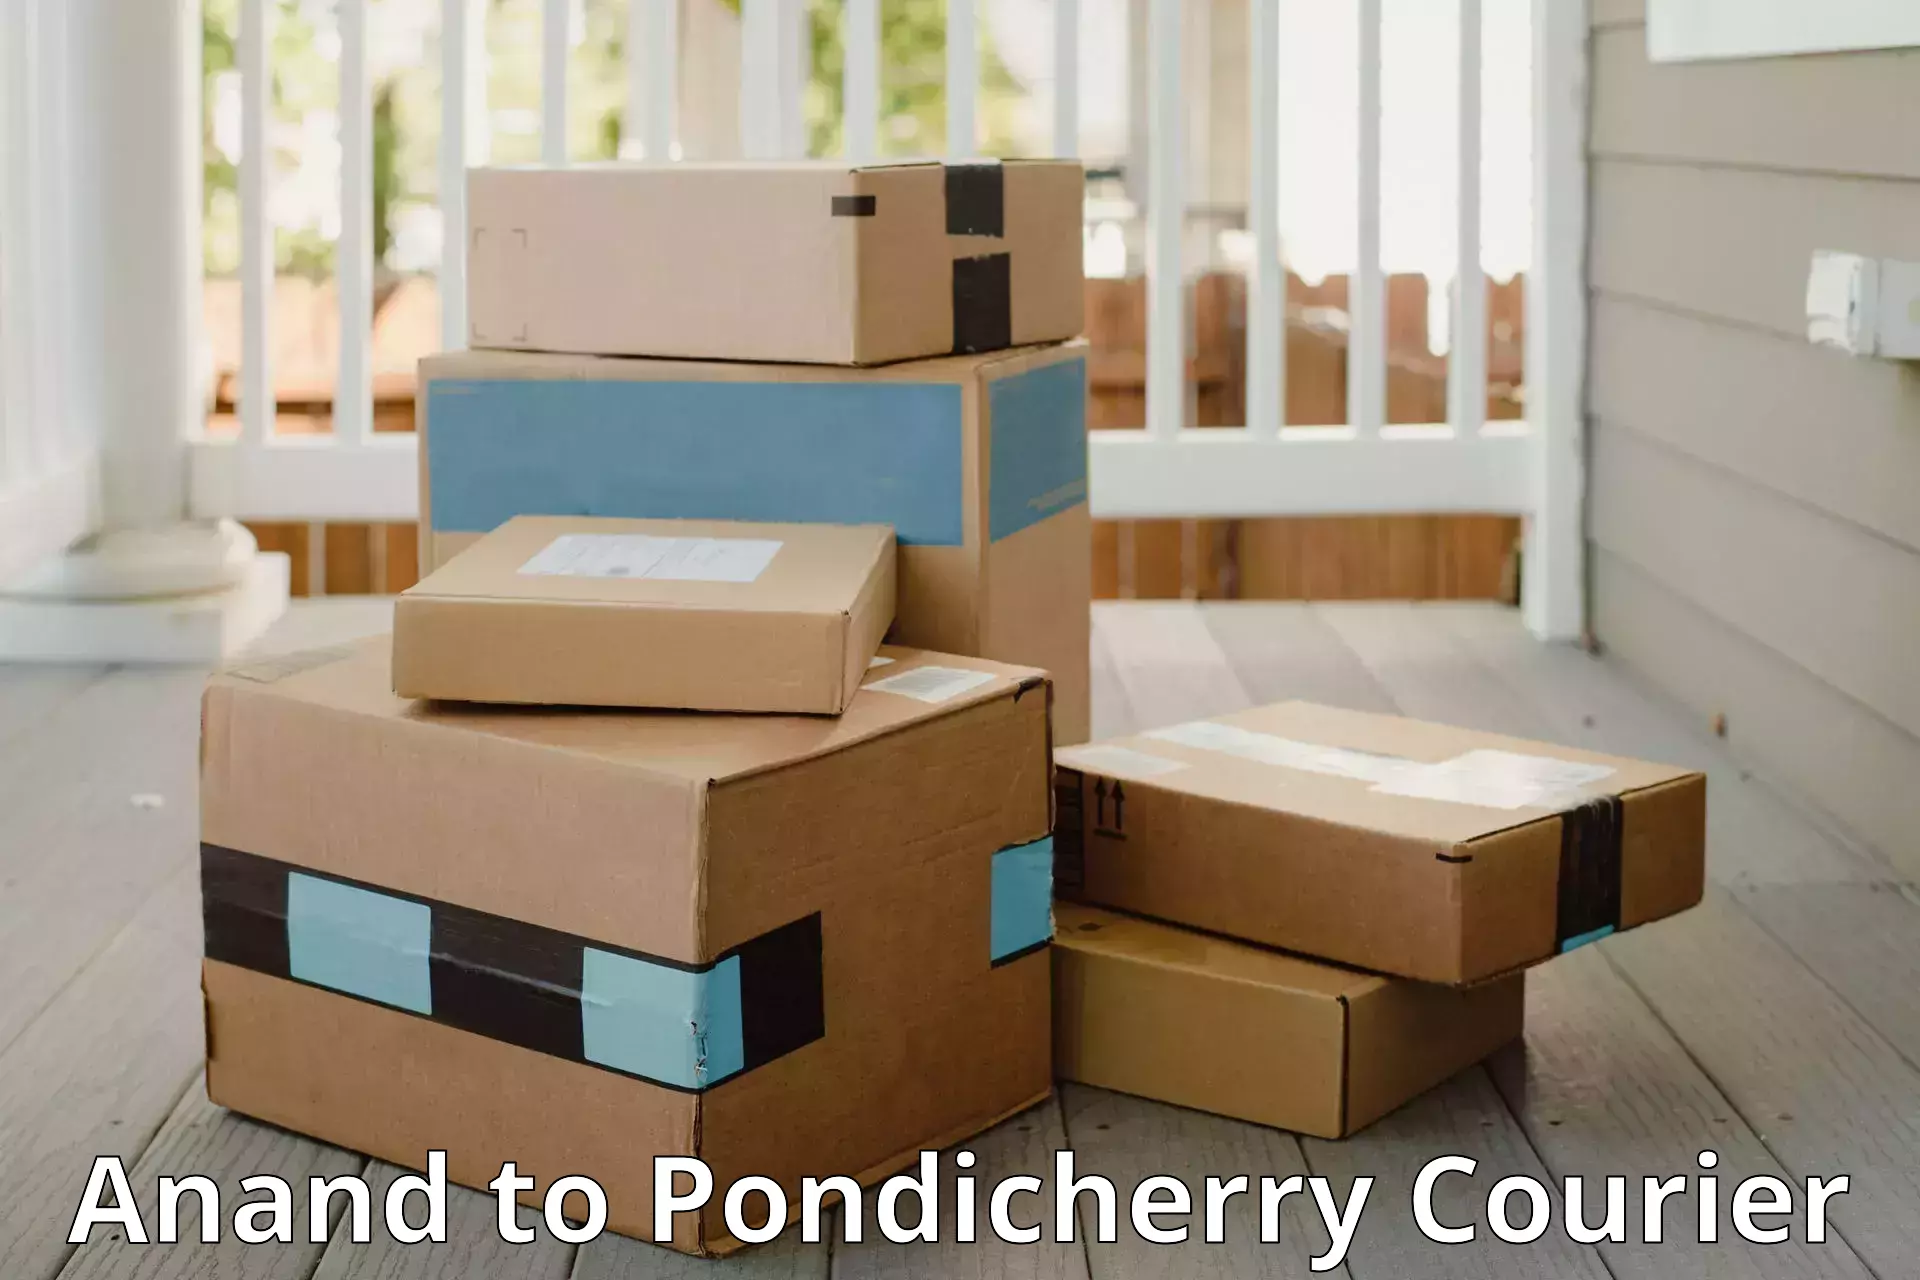 Doorstep luggage collection Anand to Pondicherry